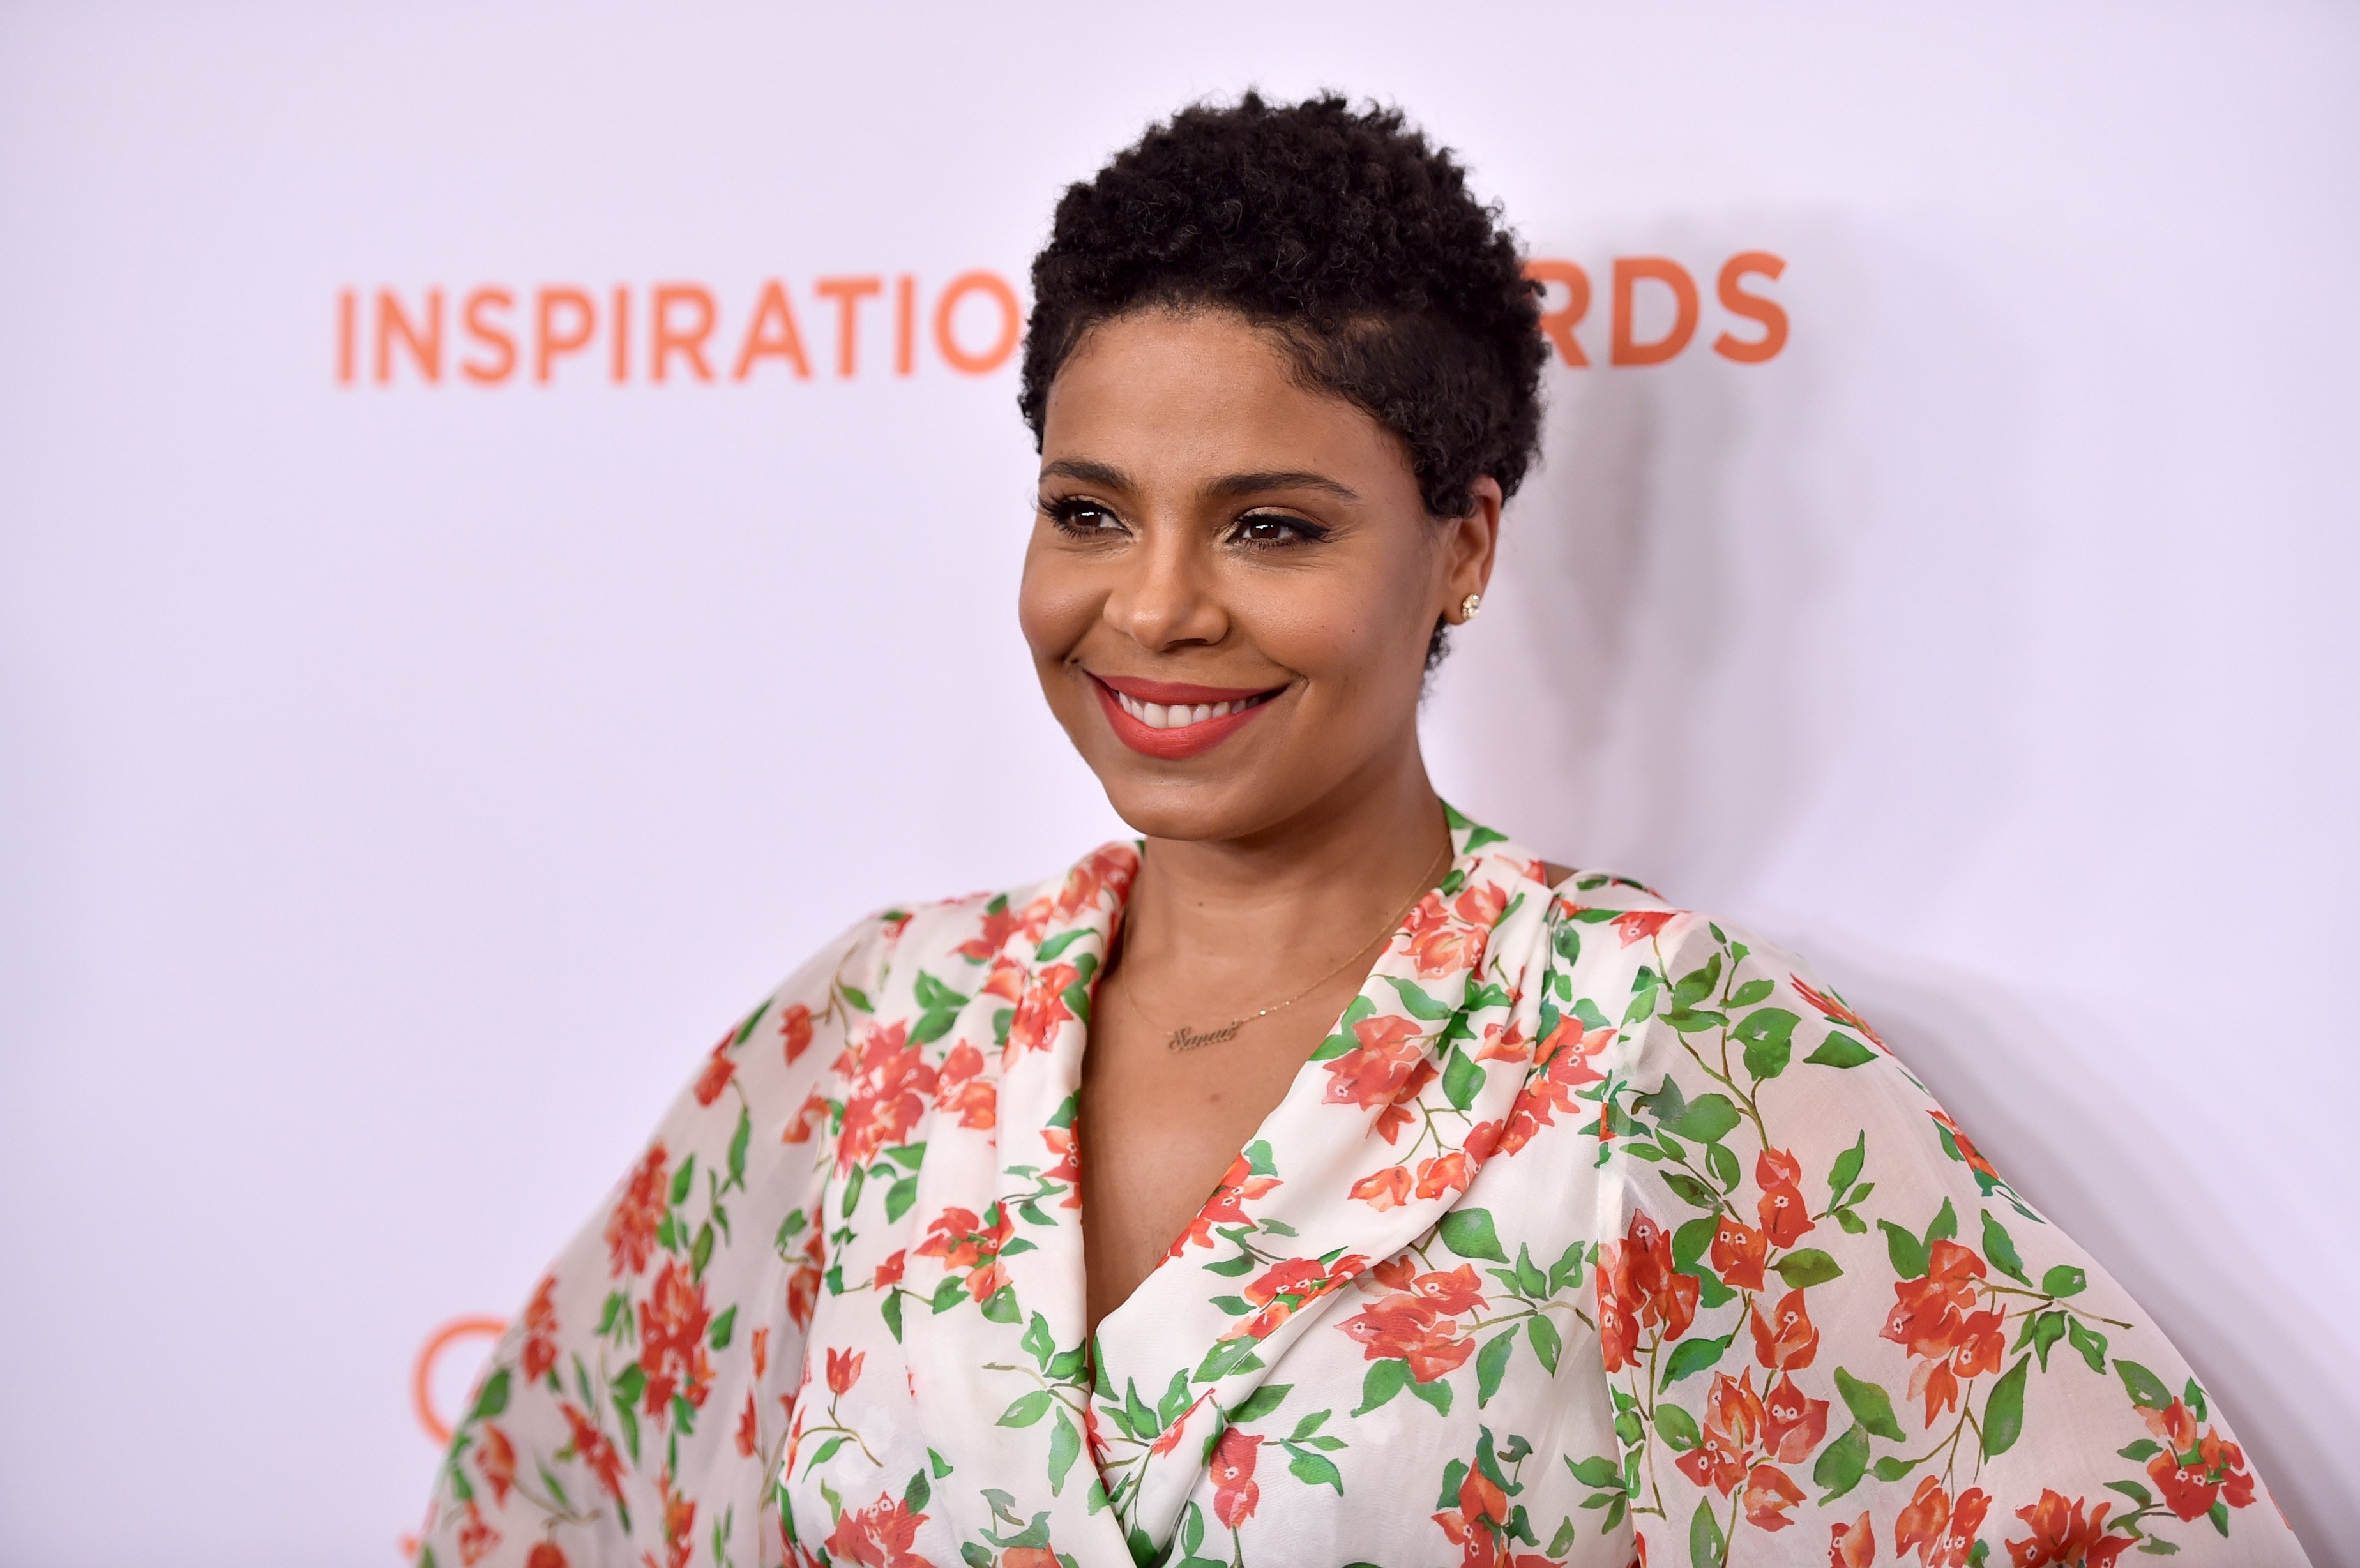 Sanaa Lathan attends Step Up's 14th annual Inspiration Awards at the Beverly Wilshire Four Seasons Hotel on June 1, 2018. | Photo: GettyImages